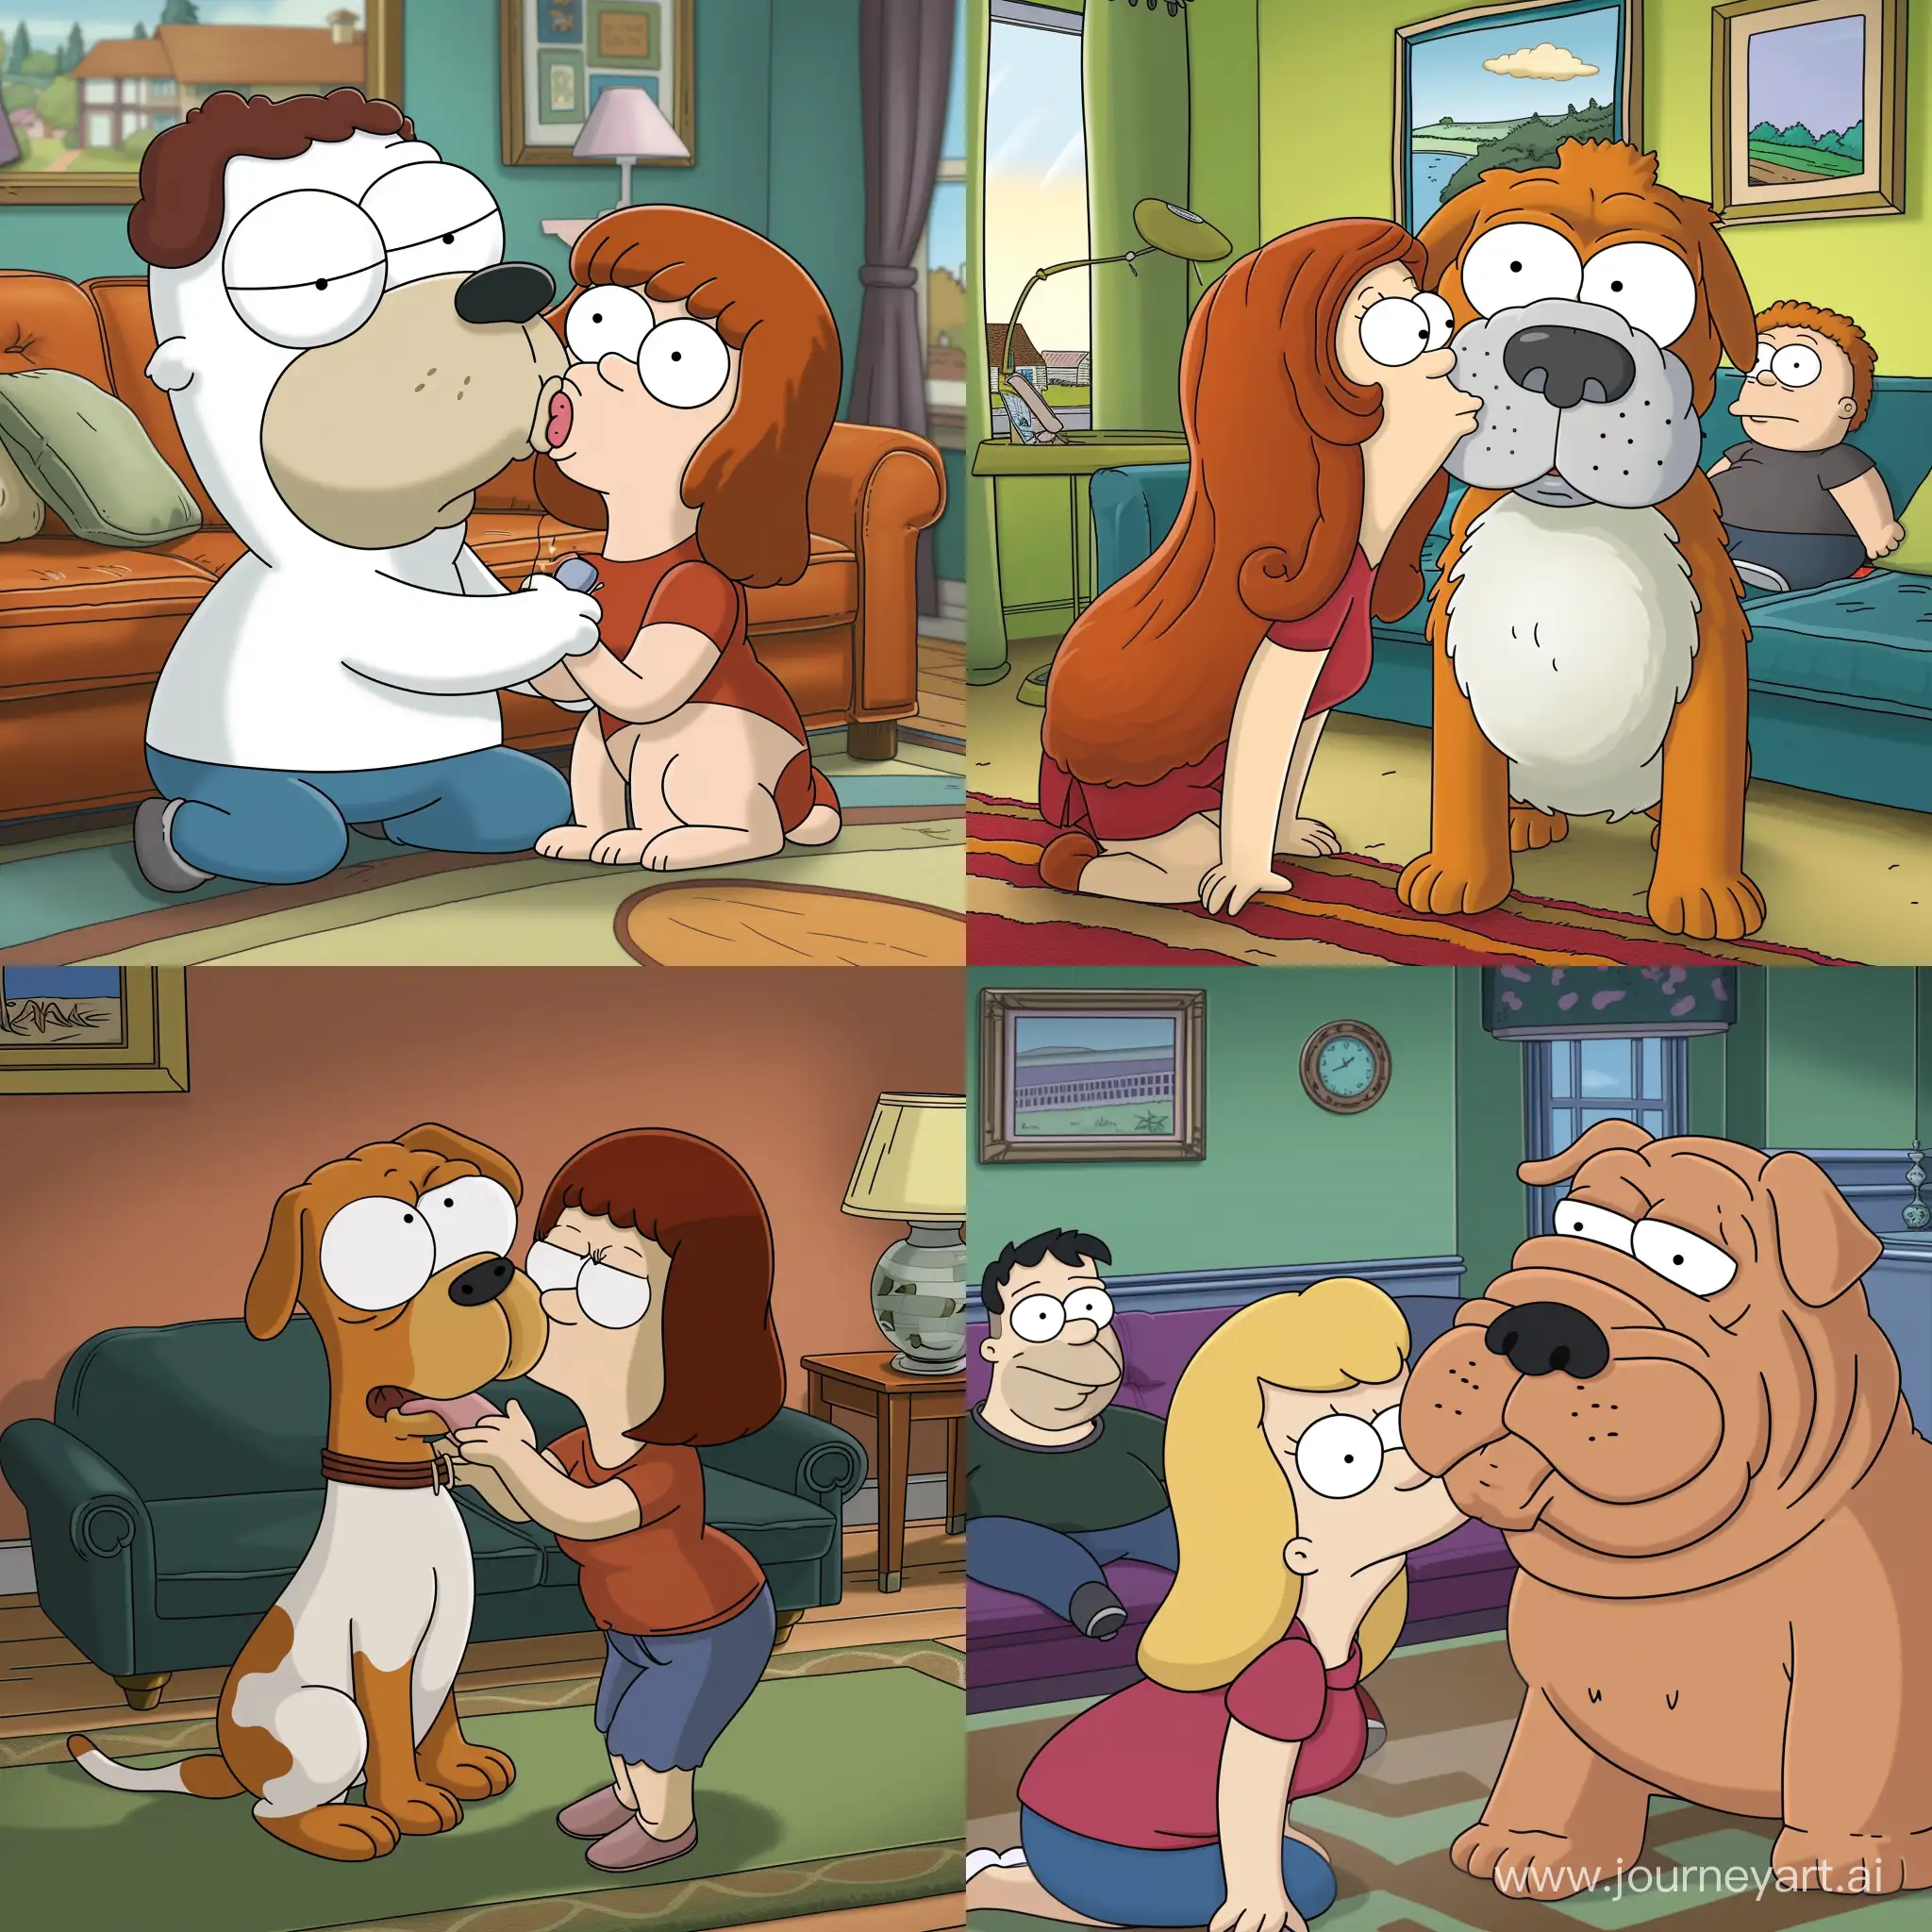 tft developper mortdog in a family guy episode kissing lois griffin while peter griffin is watching on the couch